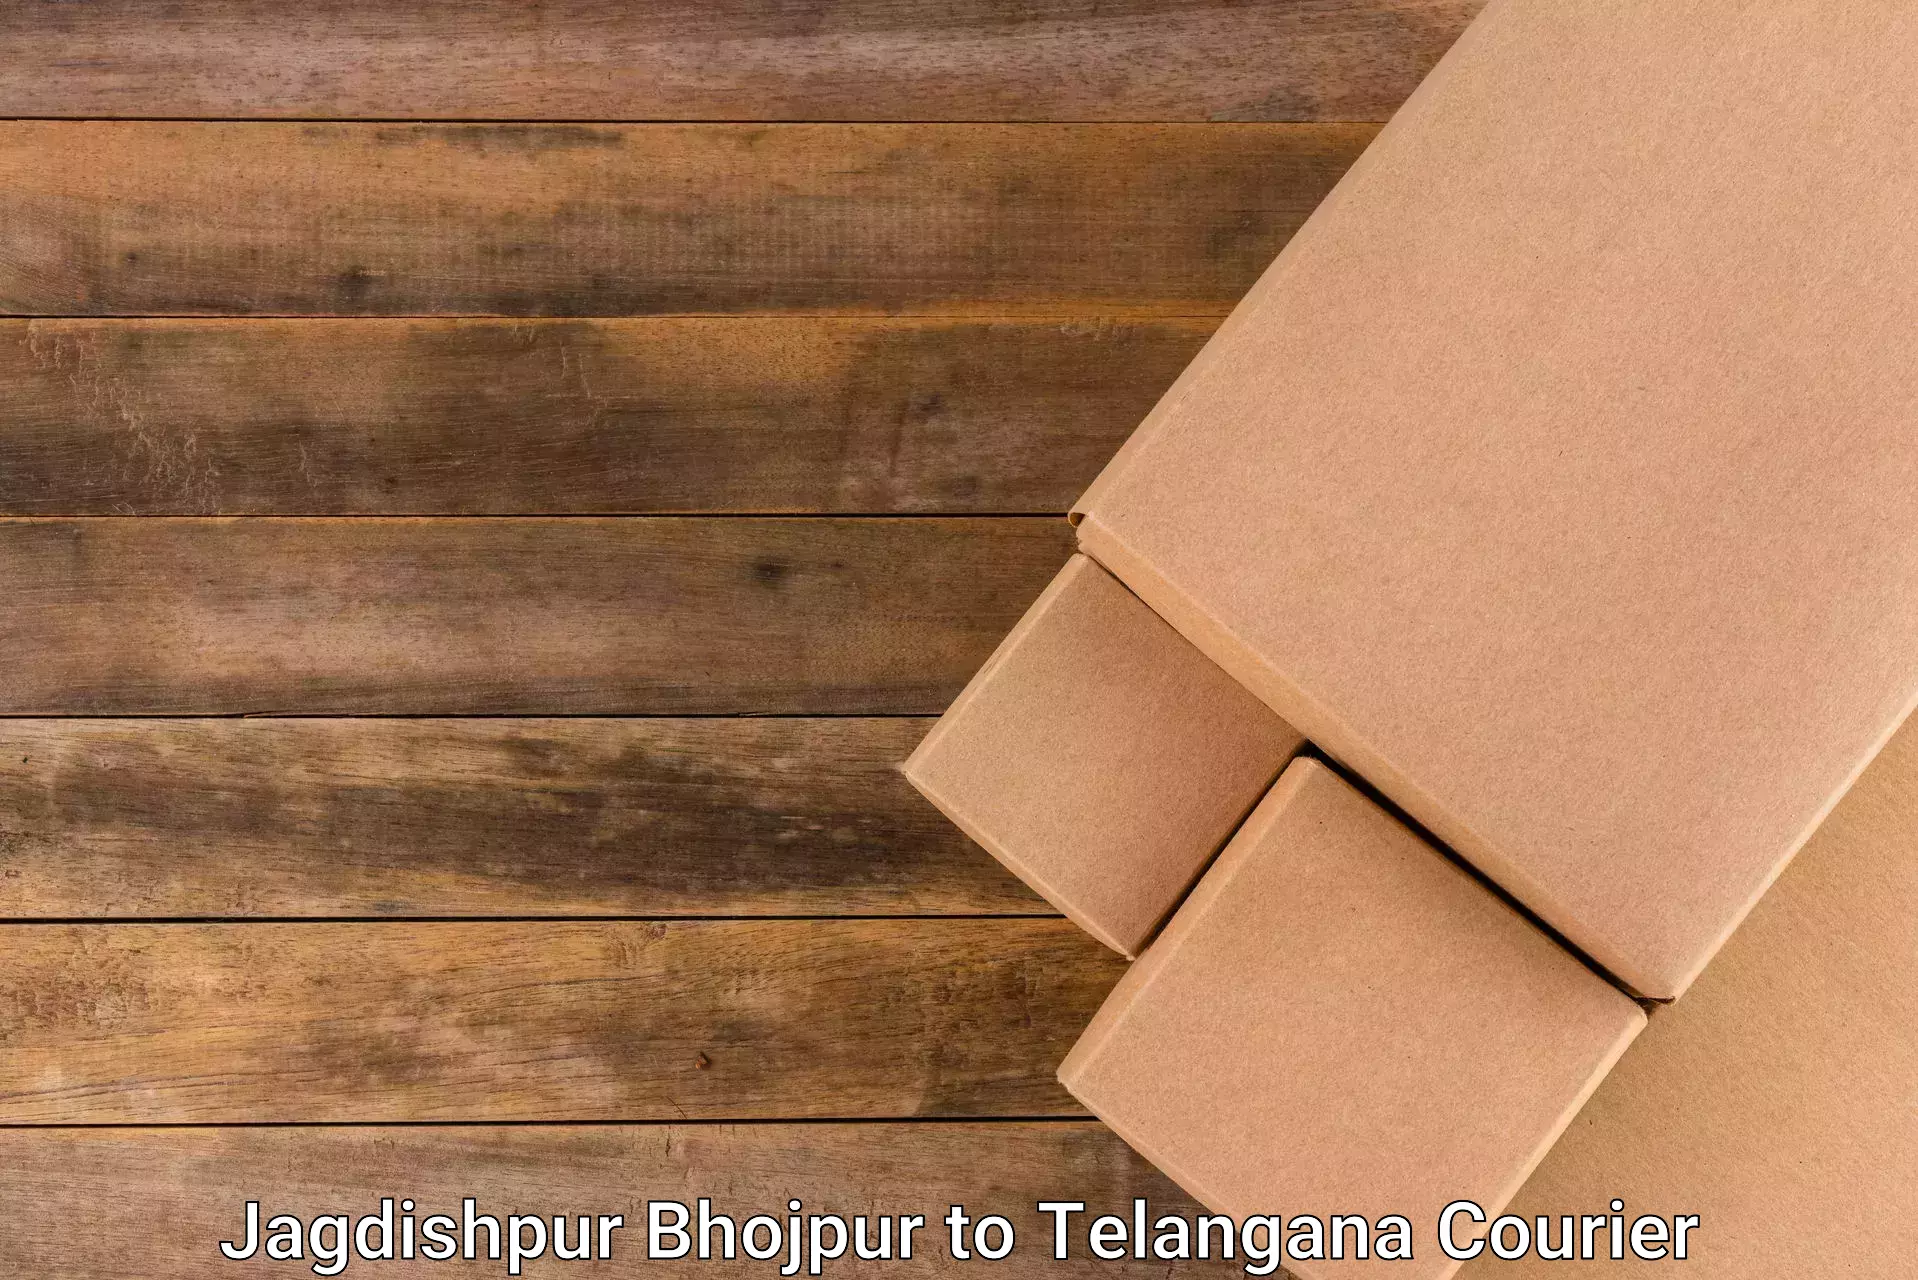 Small parcel delivery Jagdishpur Bhojpur to Siddipet